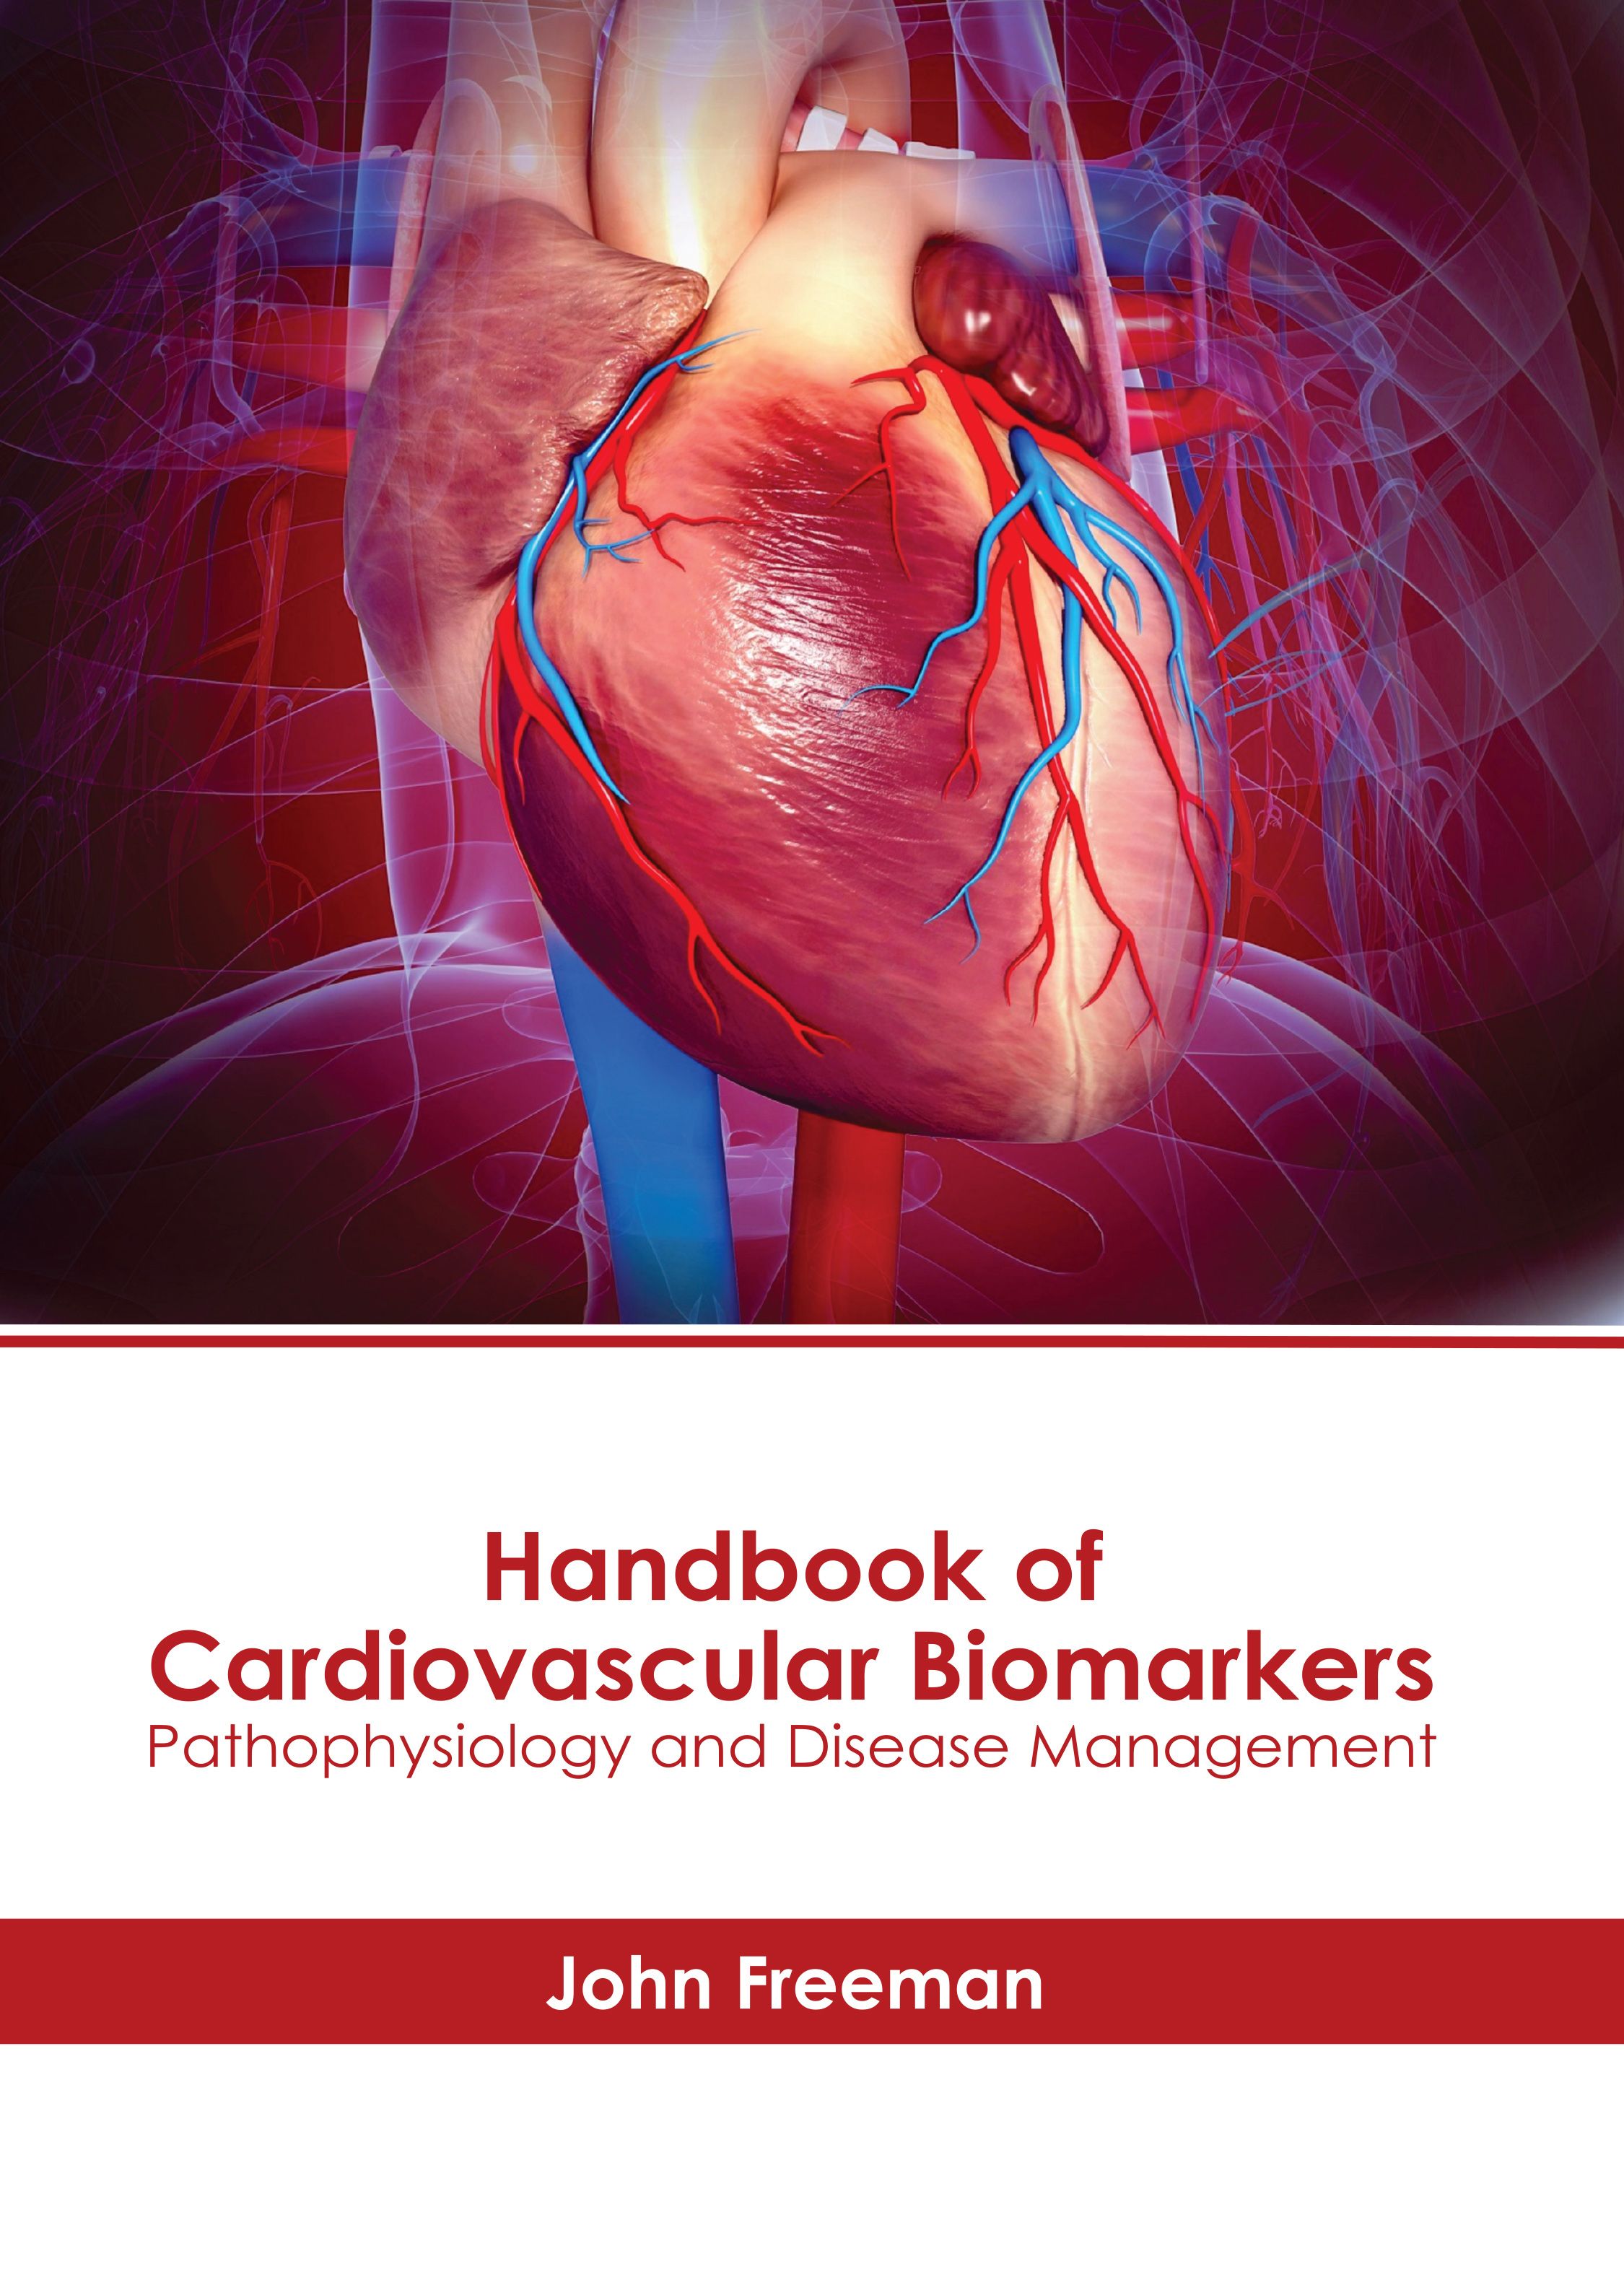 

medical-reference-books/cardiology/handbook-of-cardiovascular-biomarkers-pathophysiology-and-disease-management-9781639279616